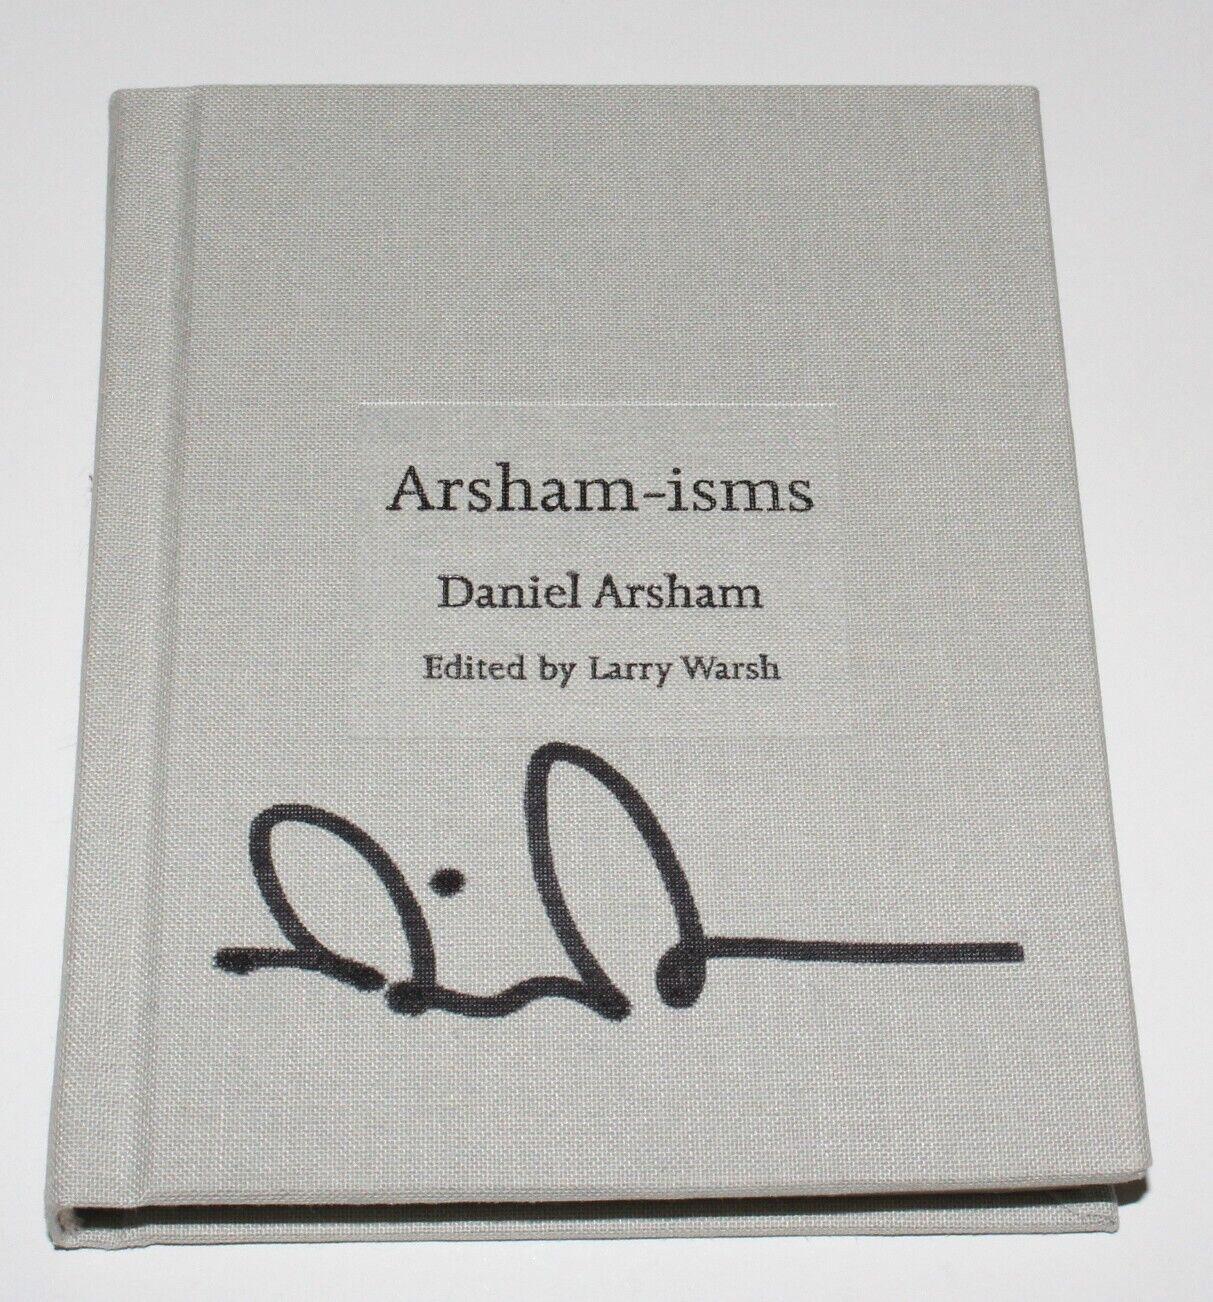 Signed Book Arsham-isms edited by Larry Warsh